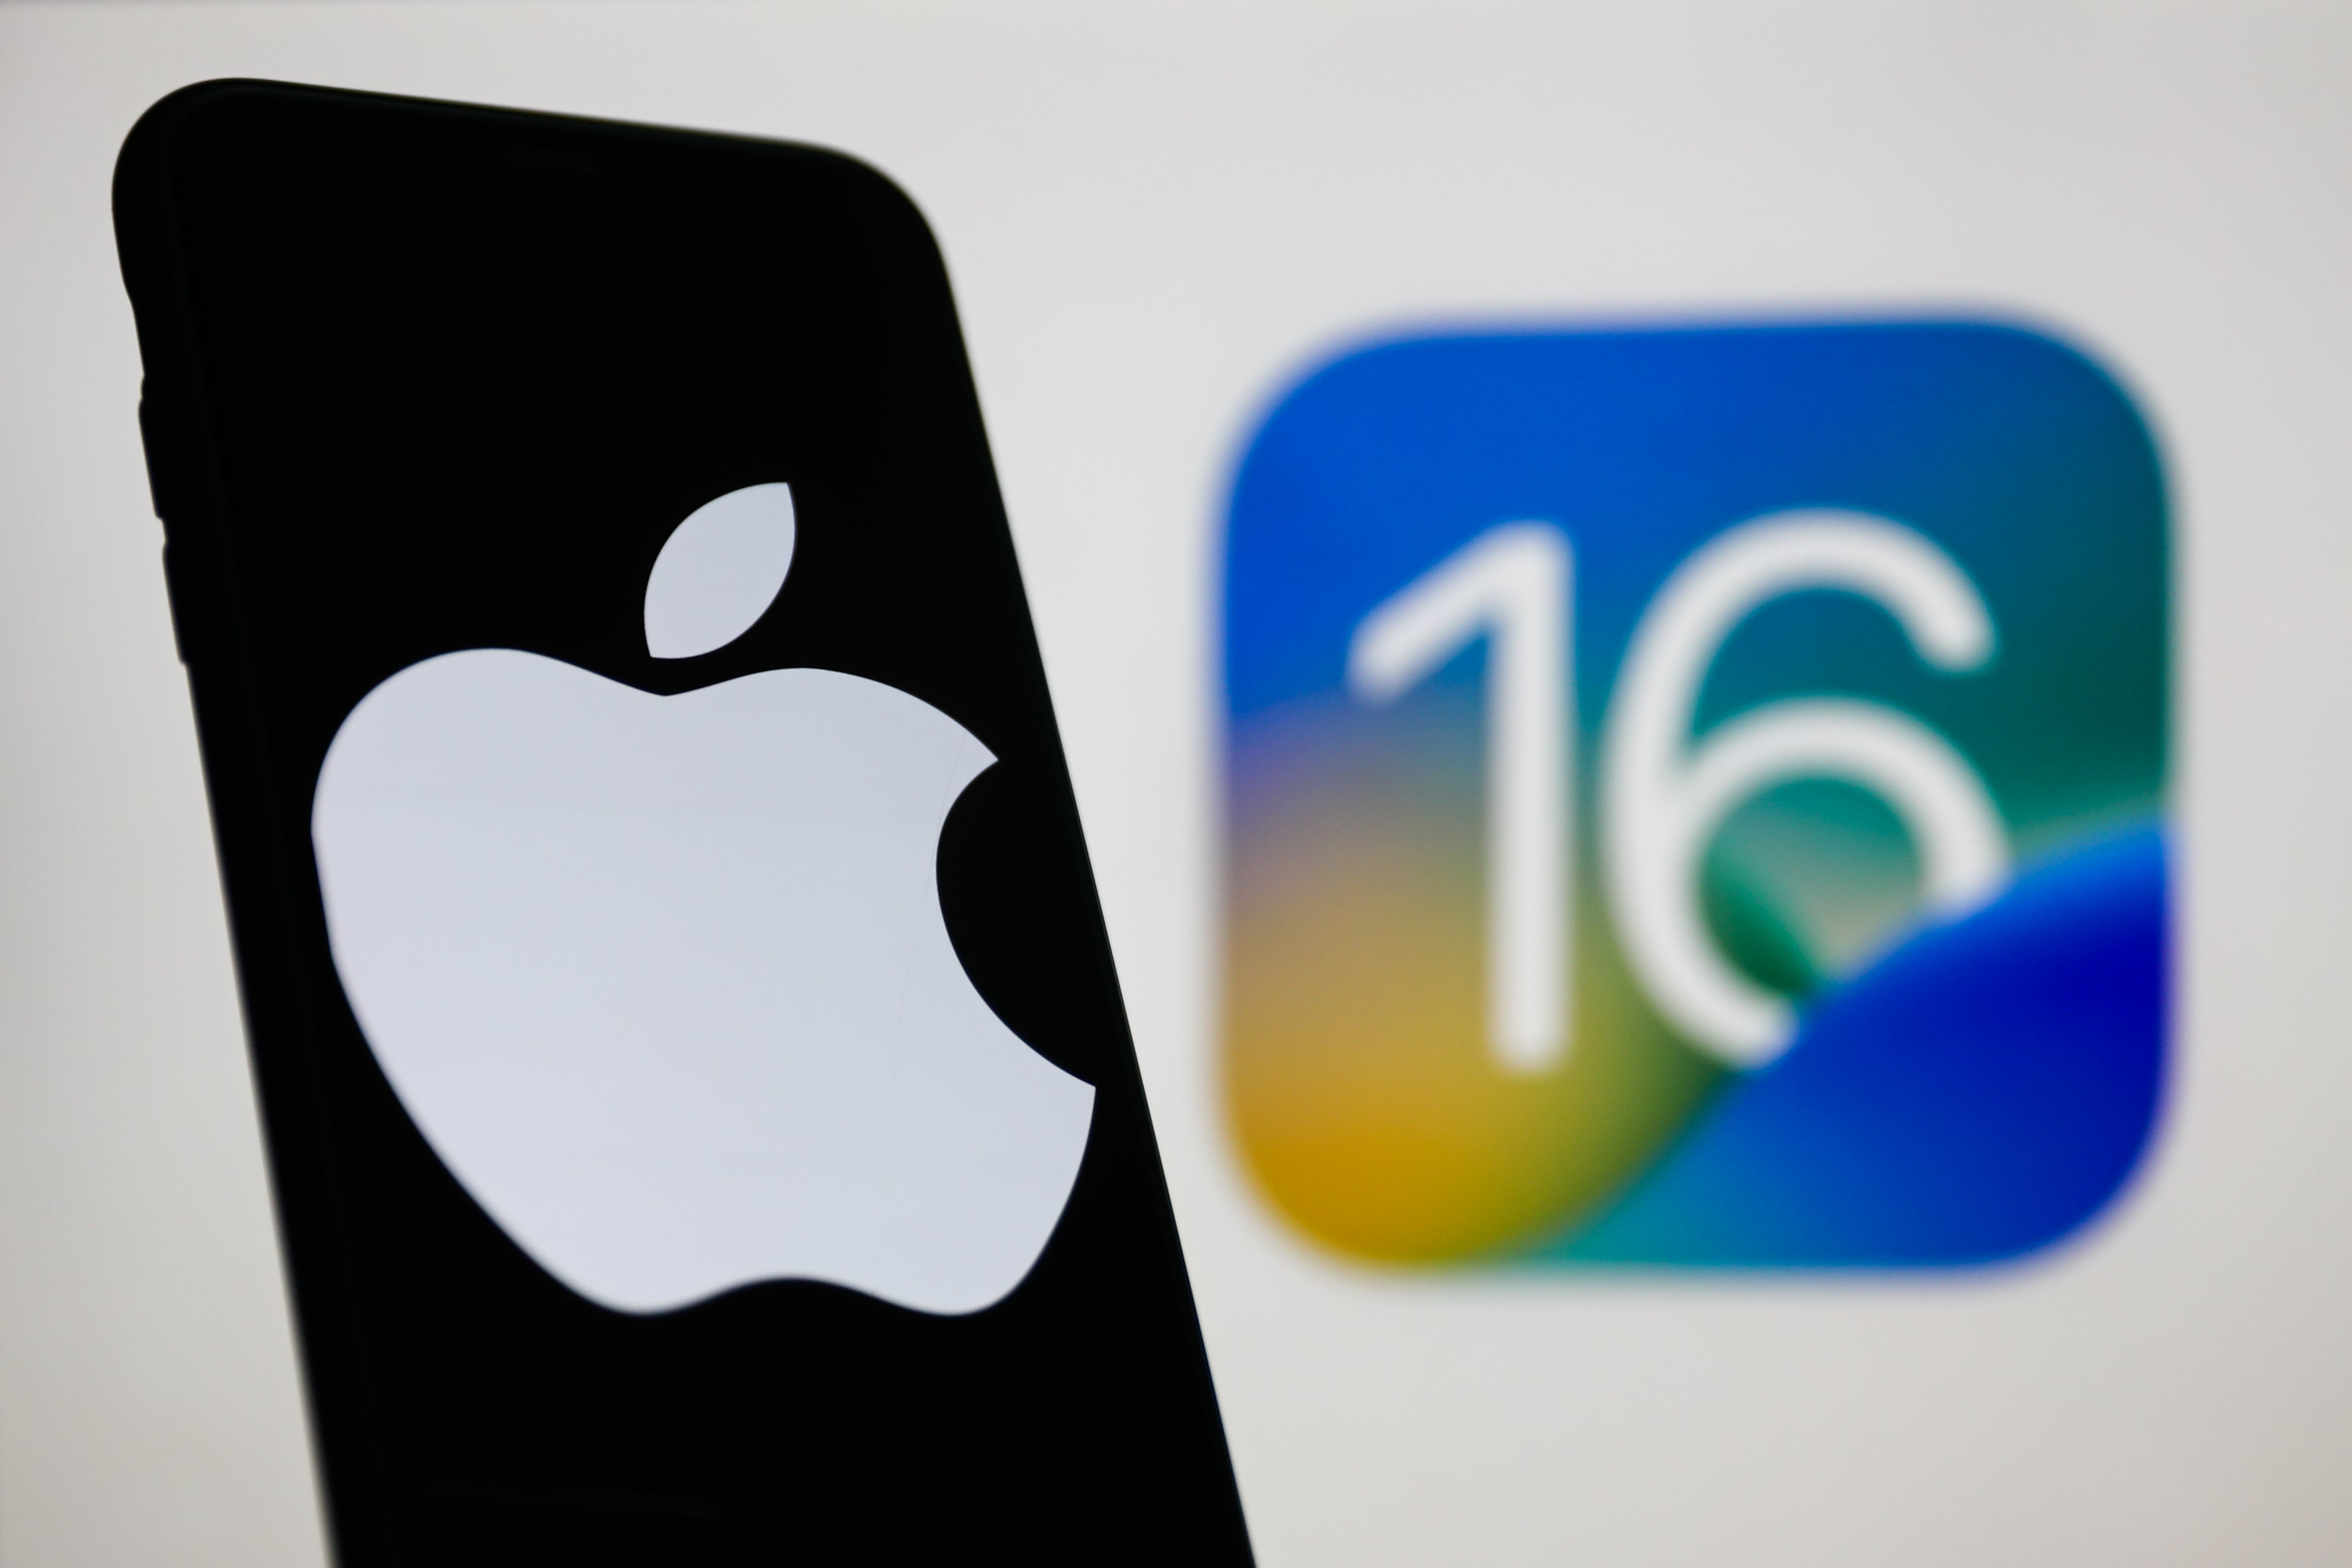 An iPhone with the new iOS 16 logo in the background